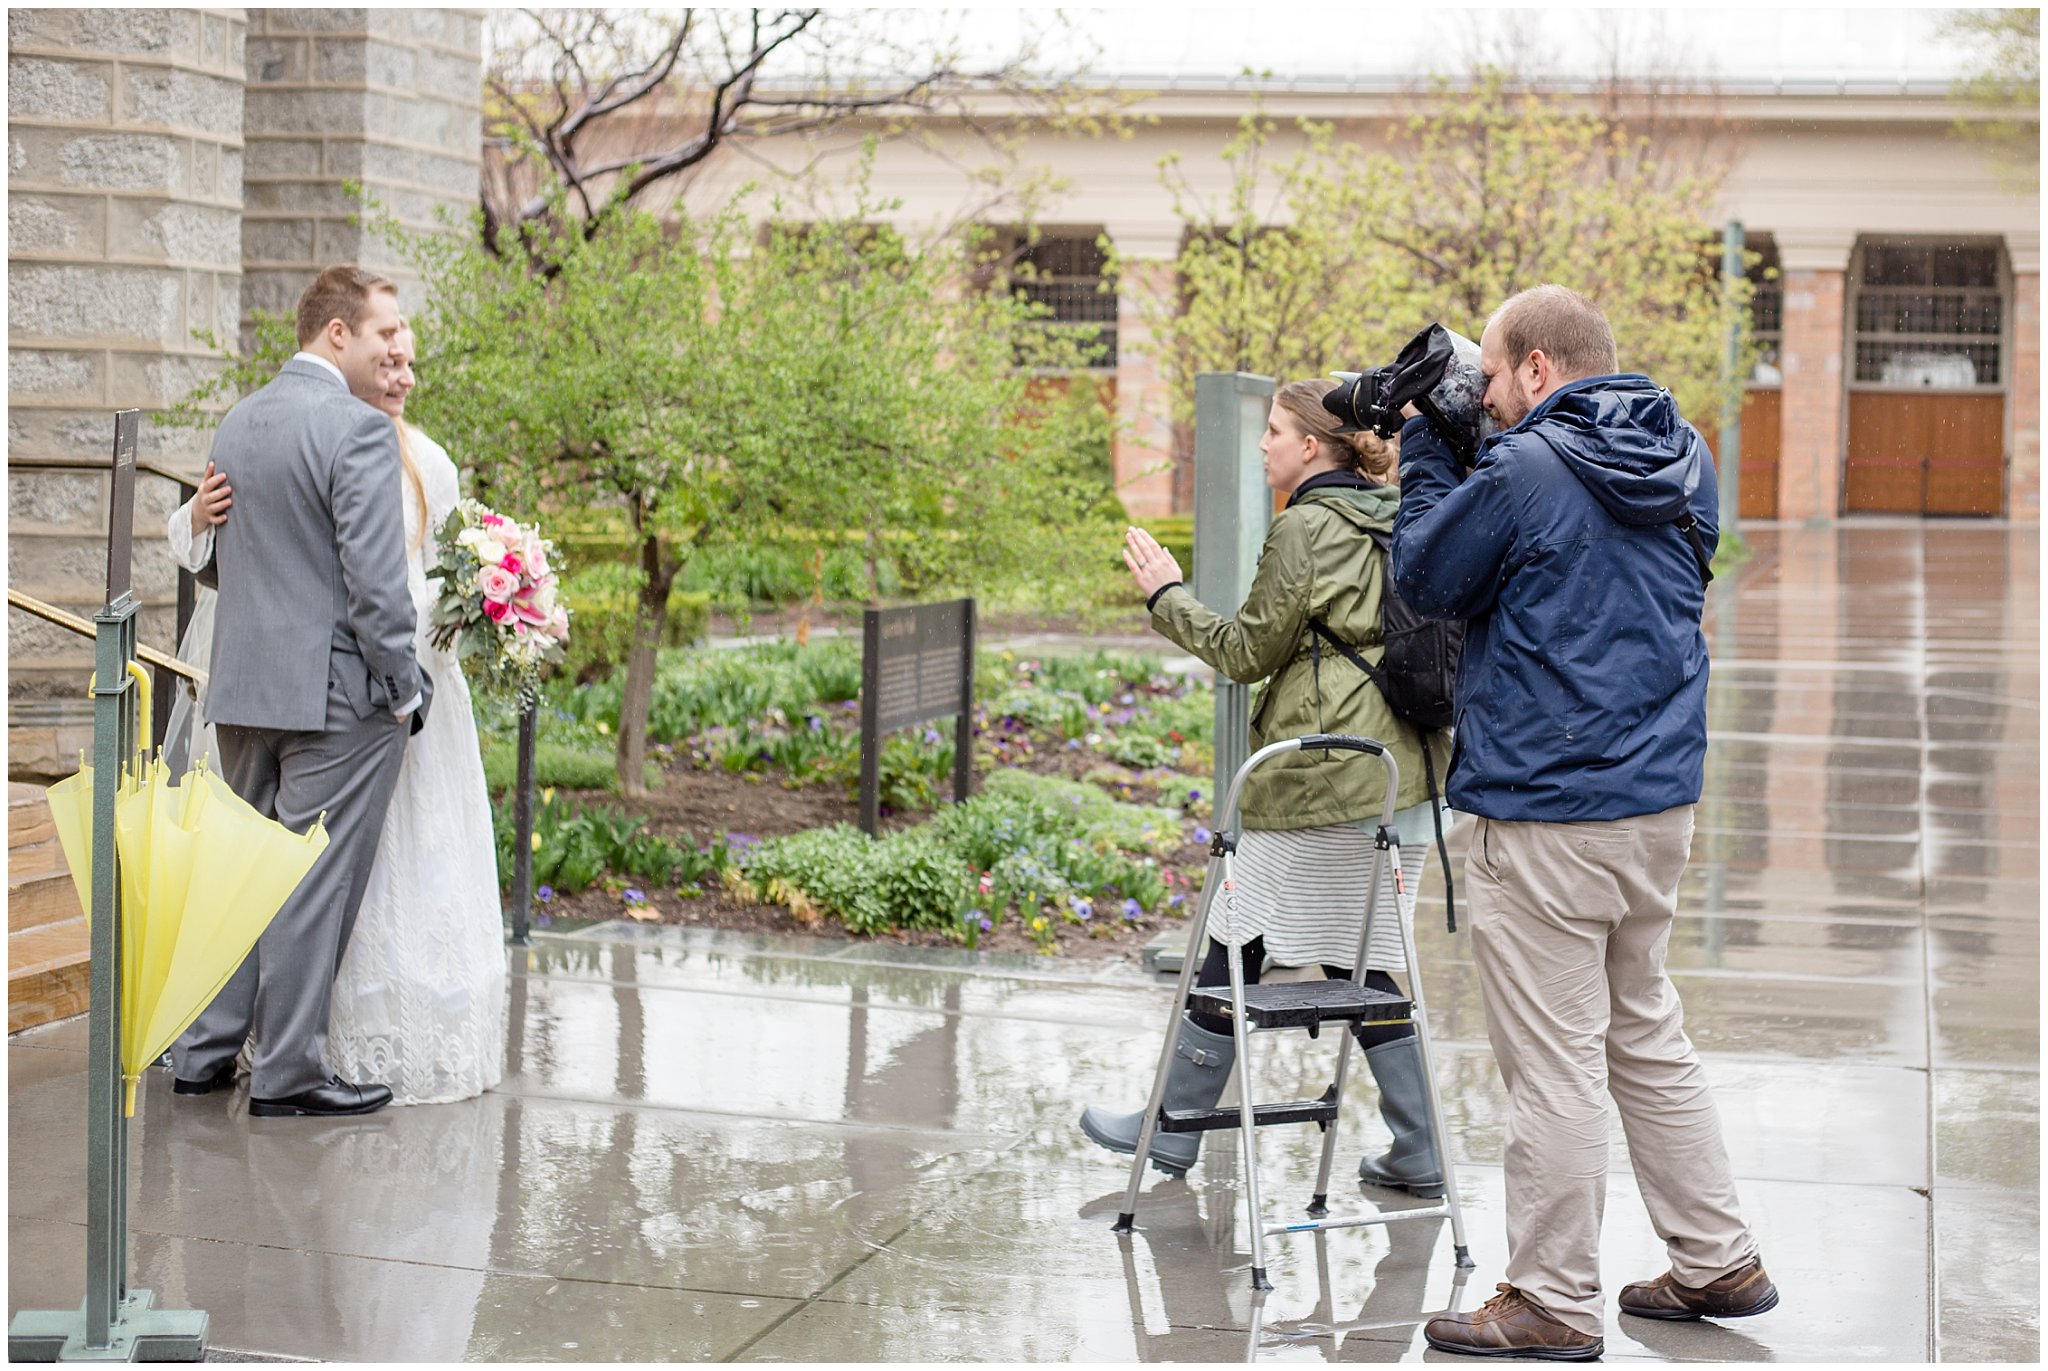 Utah Photographers at the Salt Lake Temple in the rain | Husband and Wife Photography Team | Jessie and Dallin Photography